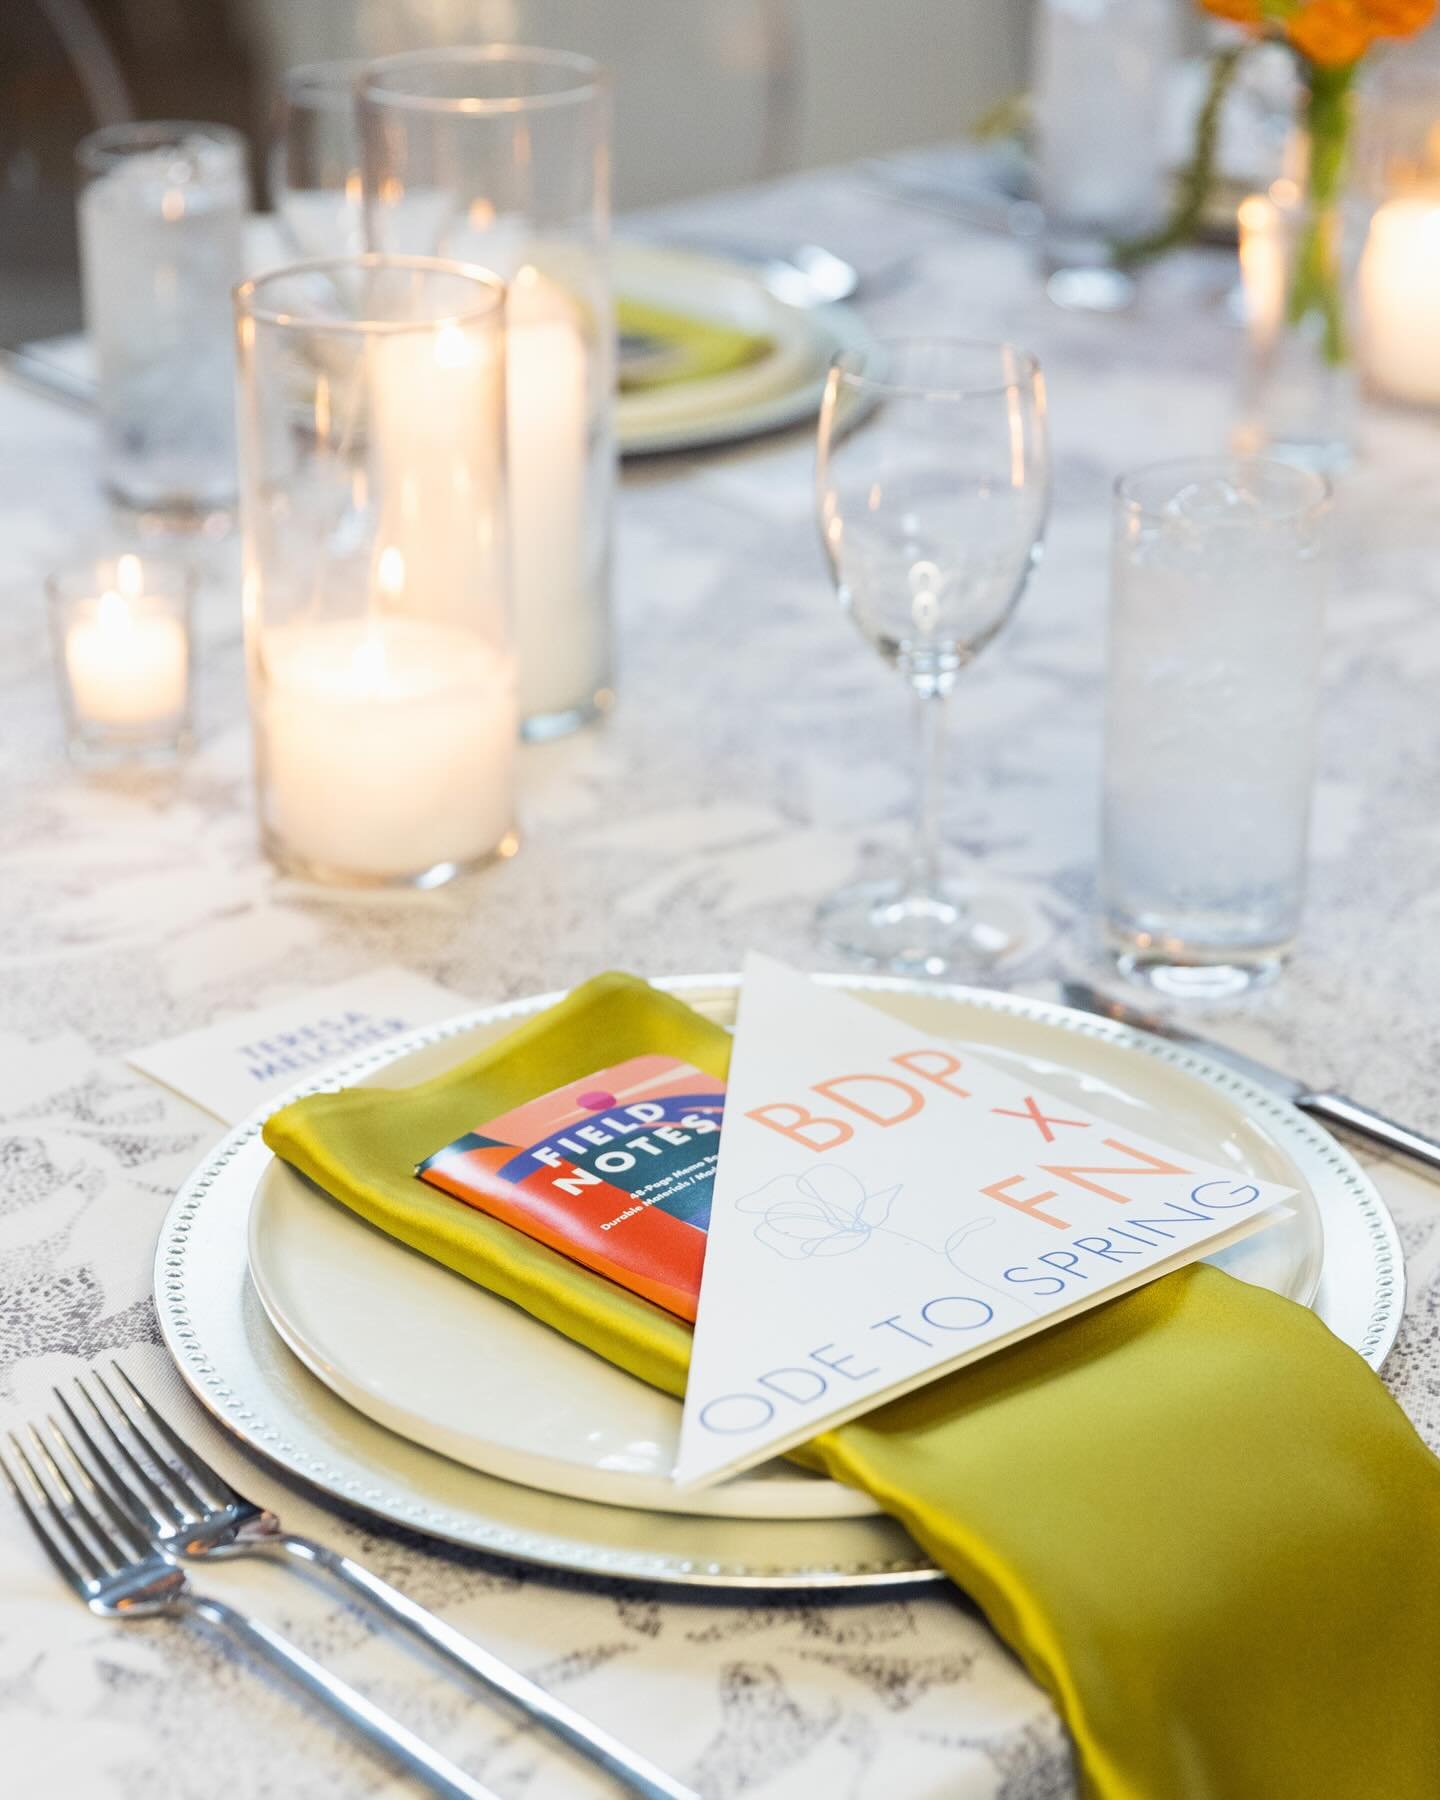 Last month, we hosted an Ode to Spring Pop-Up Dinner at @fieldnotesbrand. 🌼 It was such a fun family collaboration between BDP&rsquo;s owner @heidimcoudal, her husband/owner of Field Notes Jim @coudal, and their daughter @gracecoudal who took these 